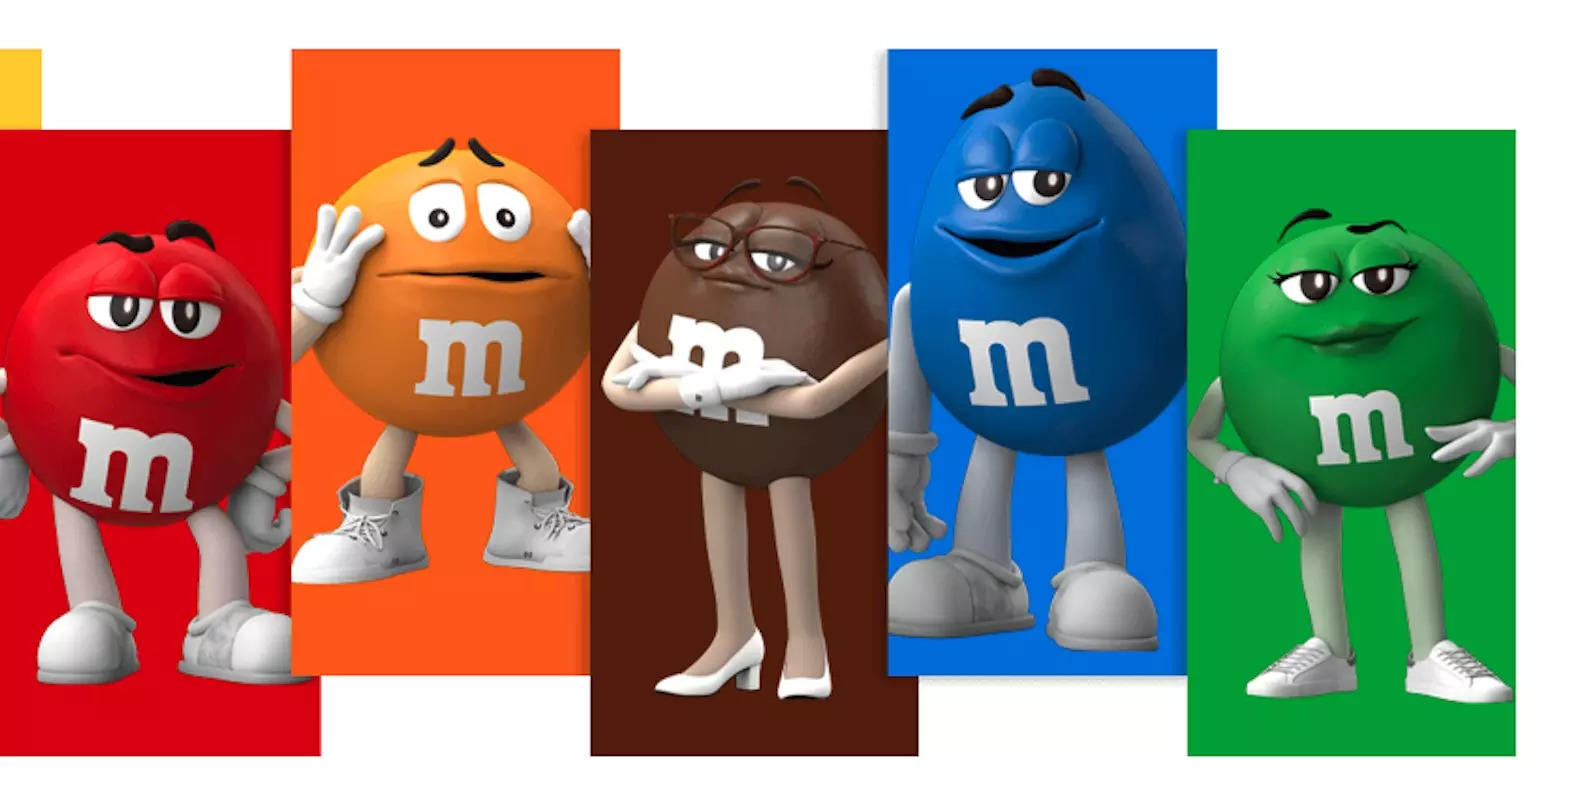 M&Ms Gets Rid of Candy Mascots After Fox News Wouldn't Stop